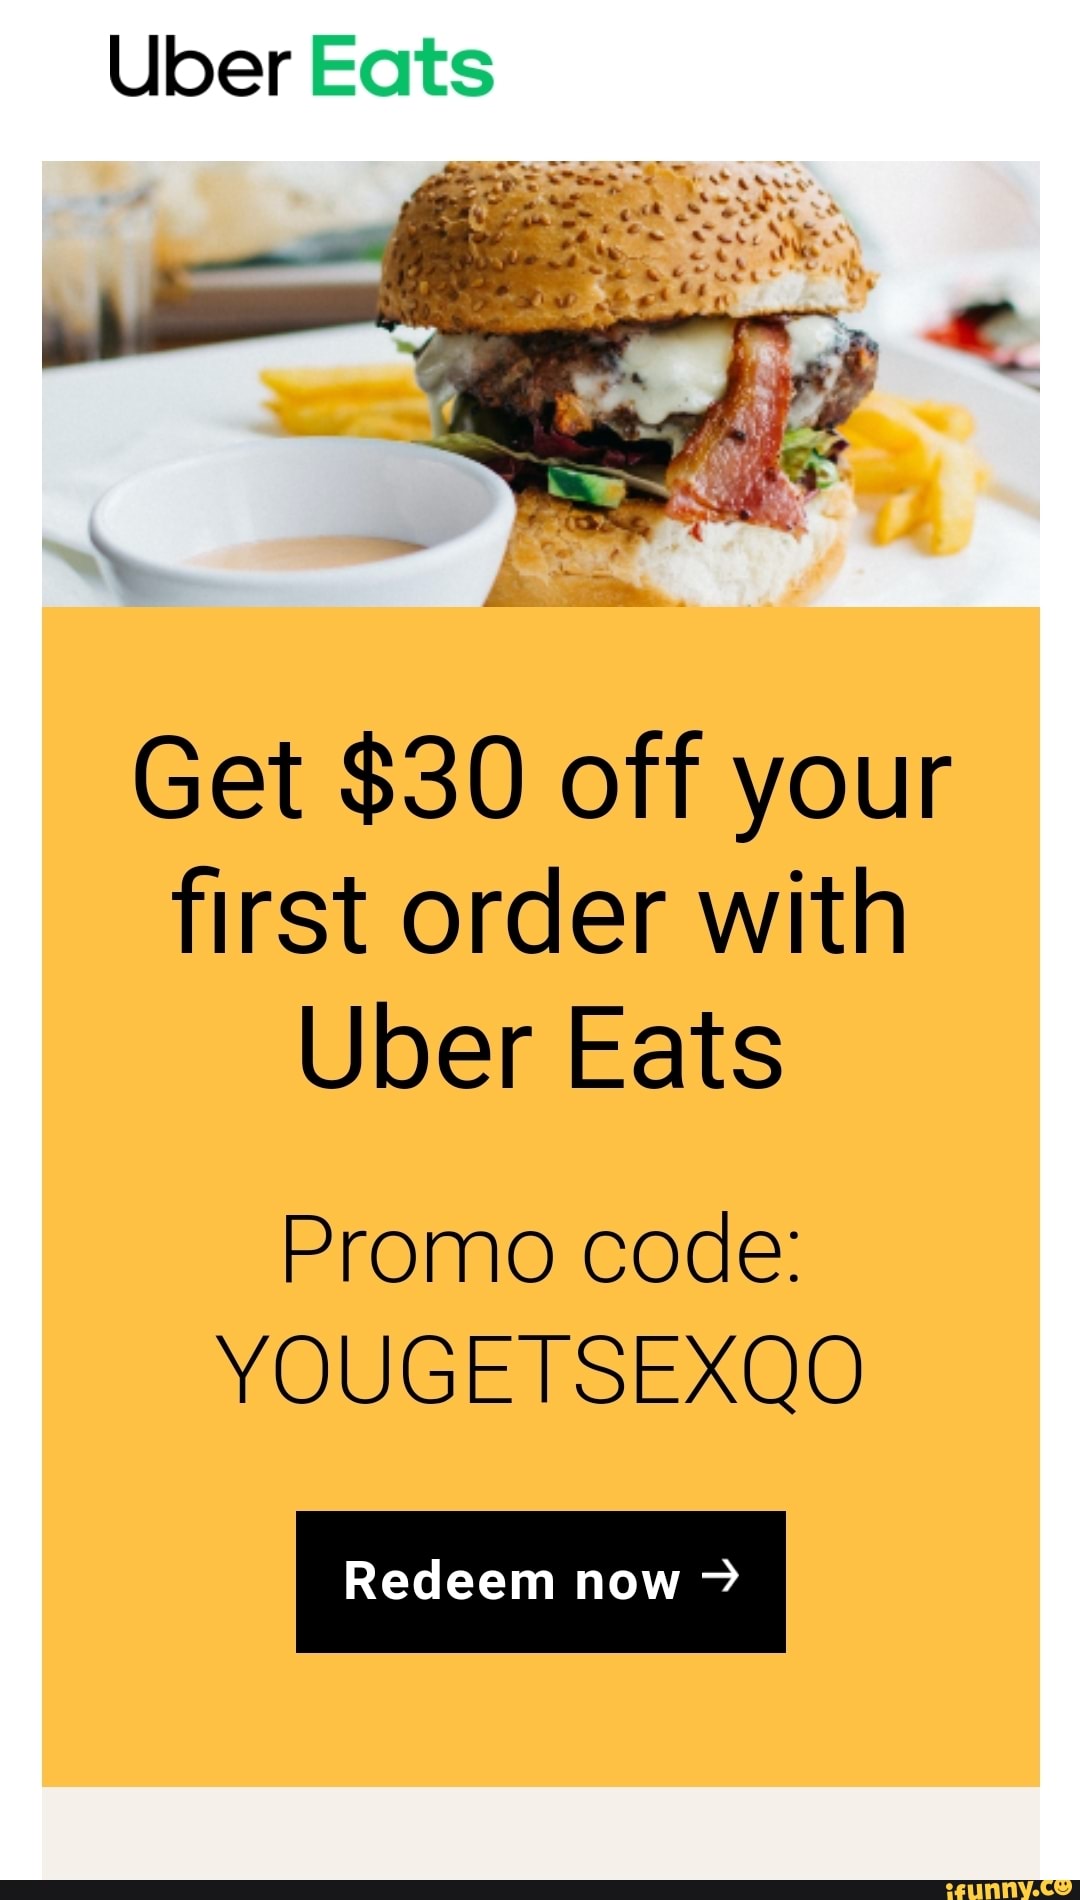 with Promo Brazil lecres Get Redeem Uber Eats - code: order off your iFunny now $30 YOUGETSEXQO first Uloer ~